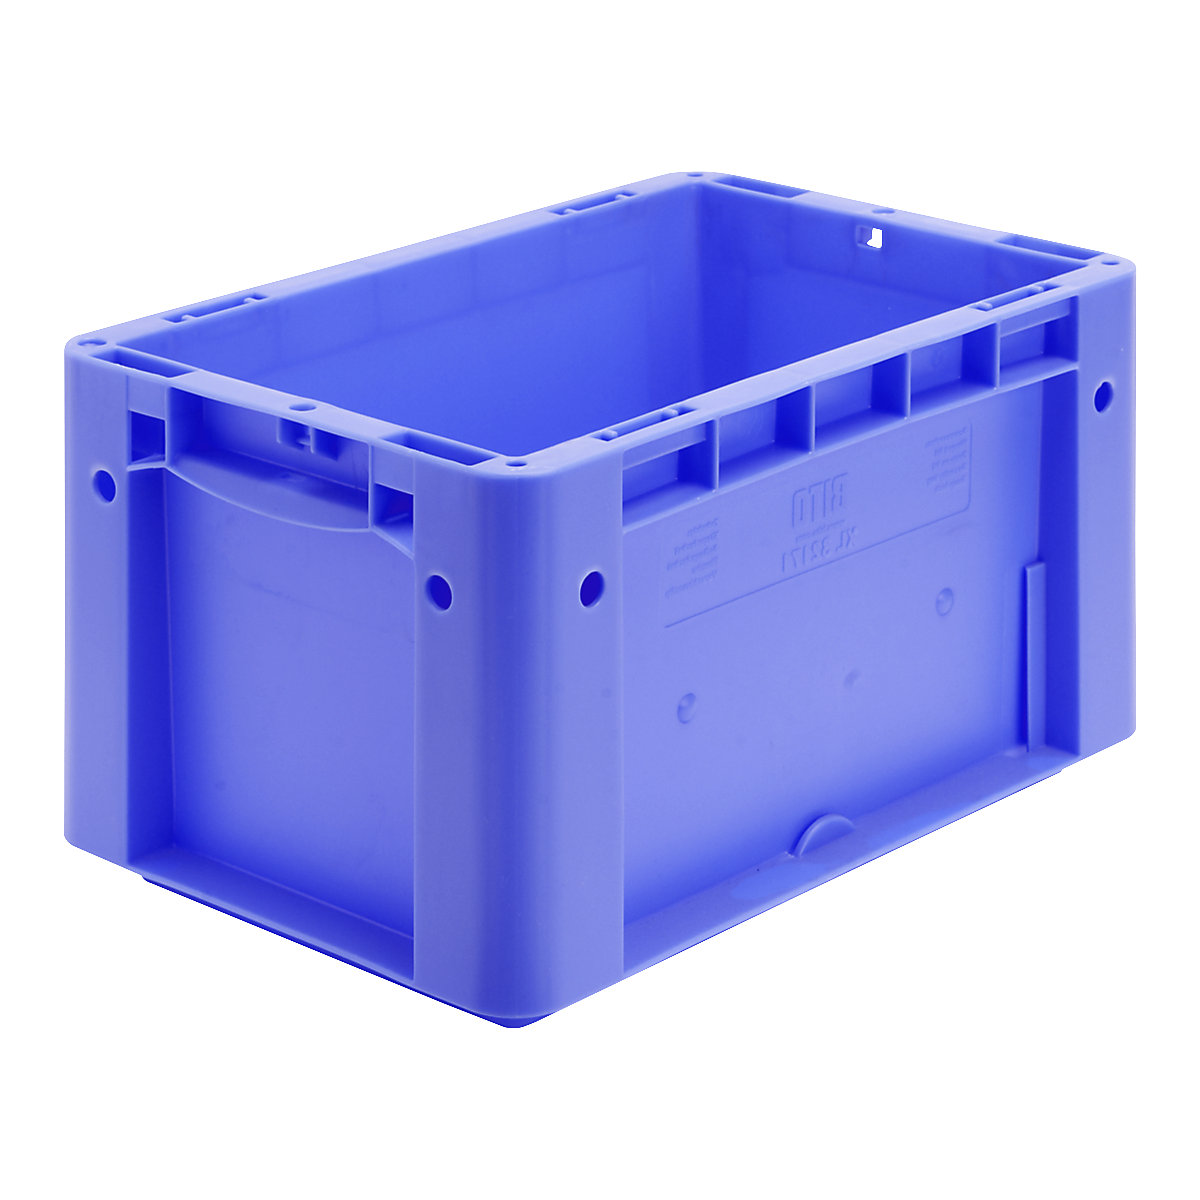 XL Euro stacking container – BITO, standard model, LxWxH 300 x 200 x 170 mm-5